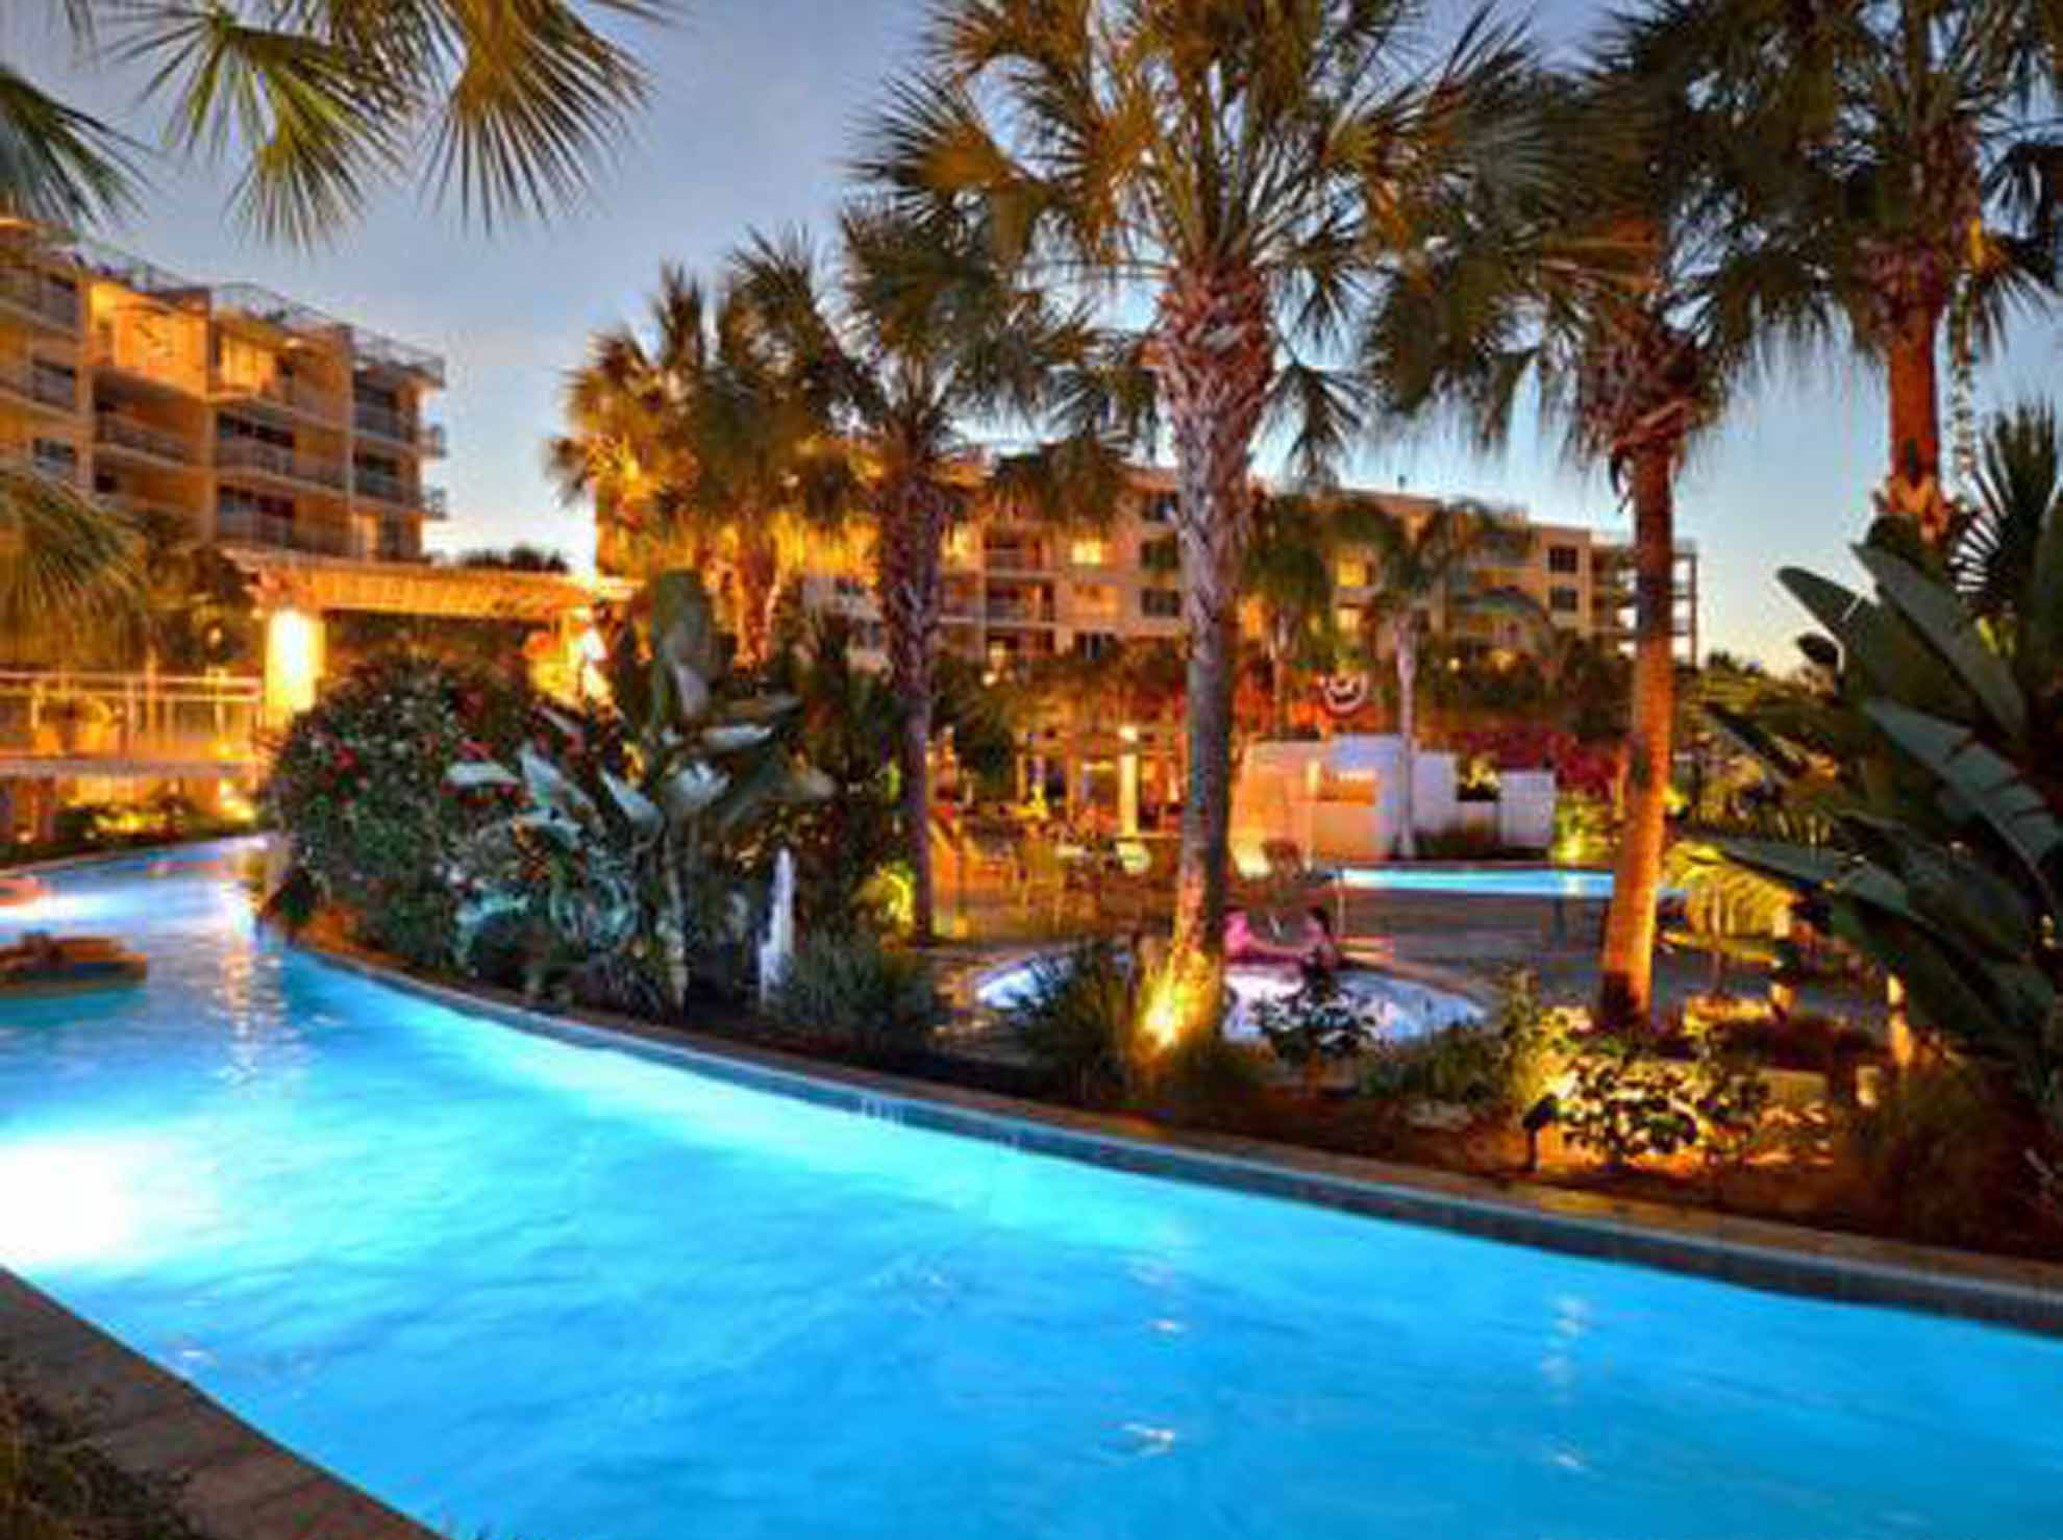 Lazy River at Destin West in the evening